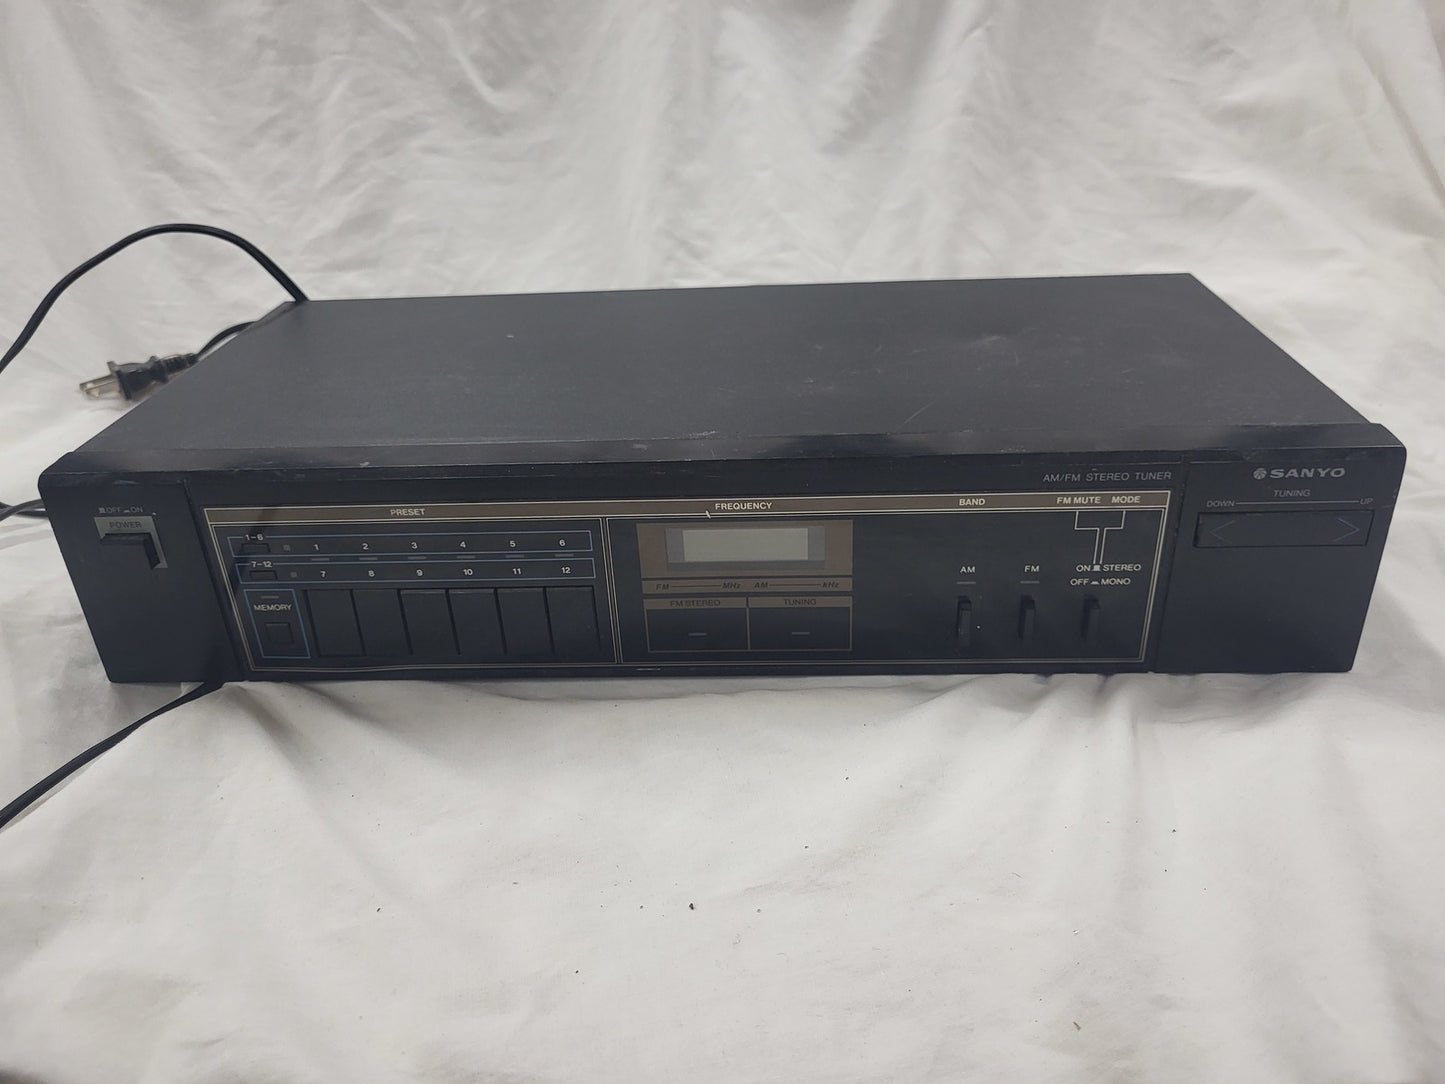 Vintage Sanyo JT-356 Stereo Tuner, Made in Japan